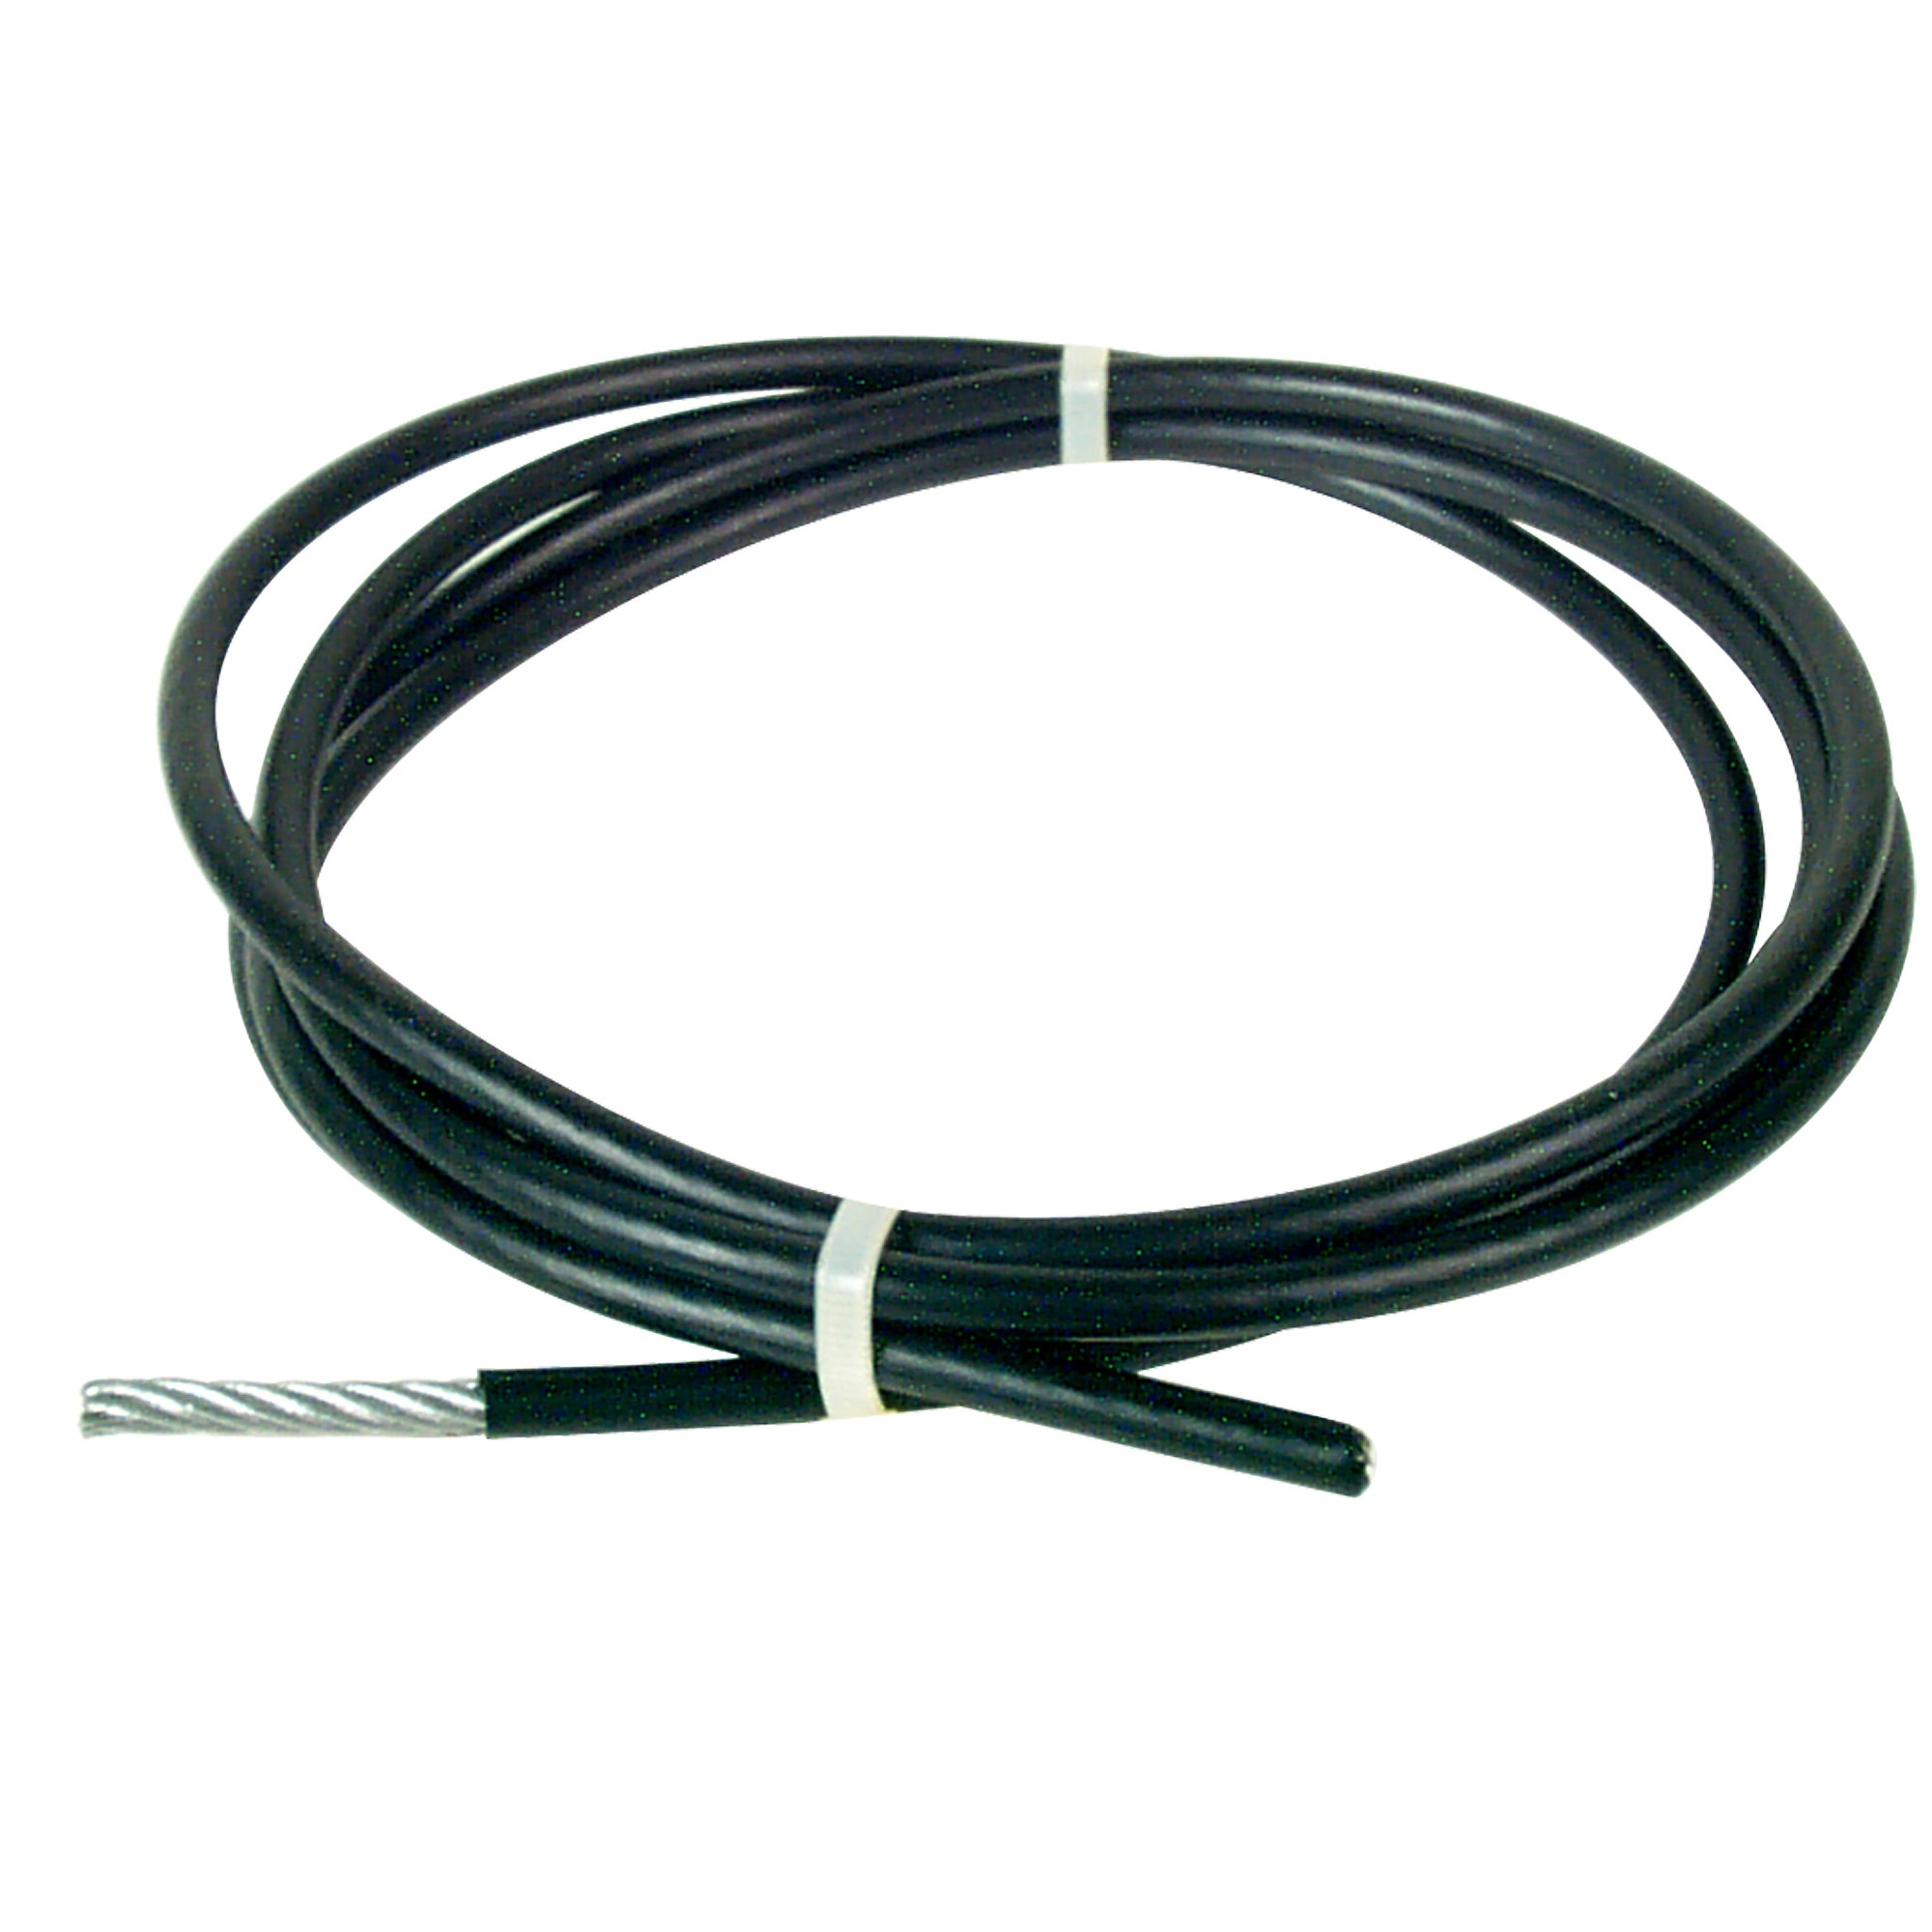 Cable by the Foot | 1/4" Diameter with Black Nylon Coating